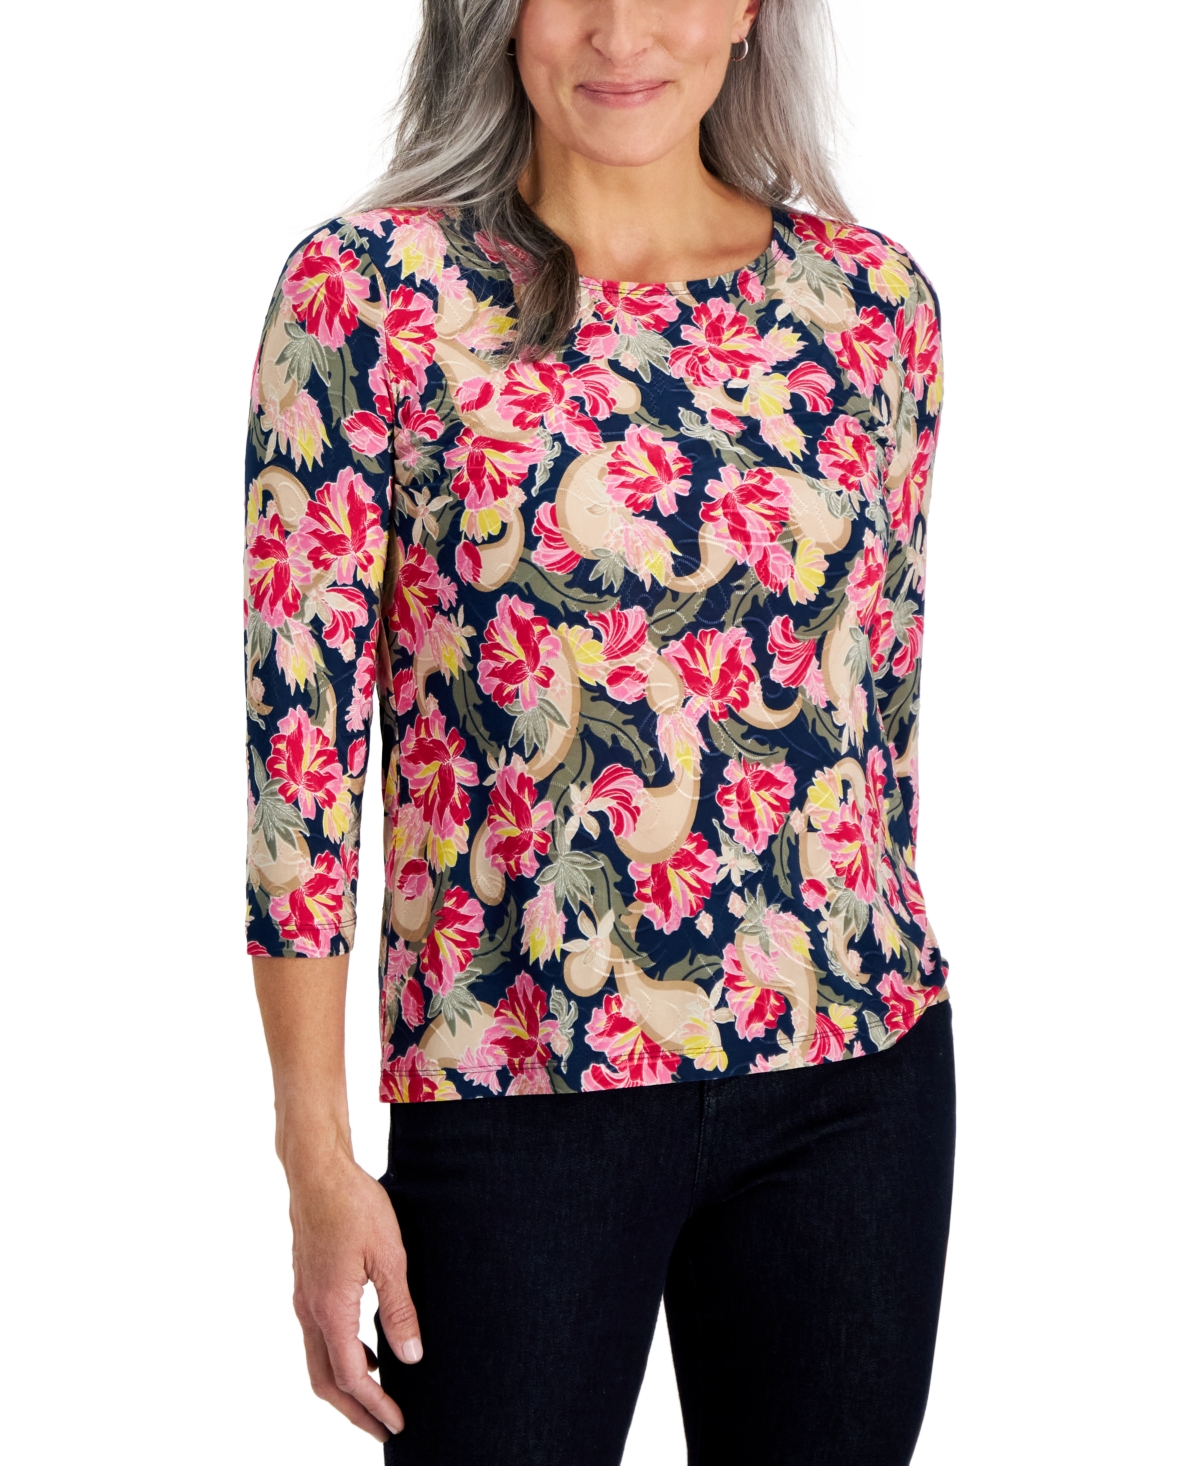 Jm Collection Petite Oaklyn Garden Jacquard Top, Created For Macy's In Intrepid Blue Combo